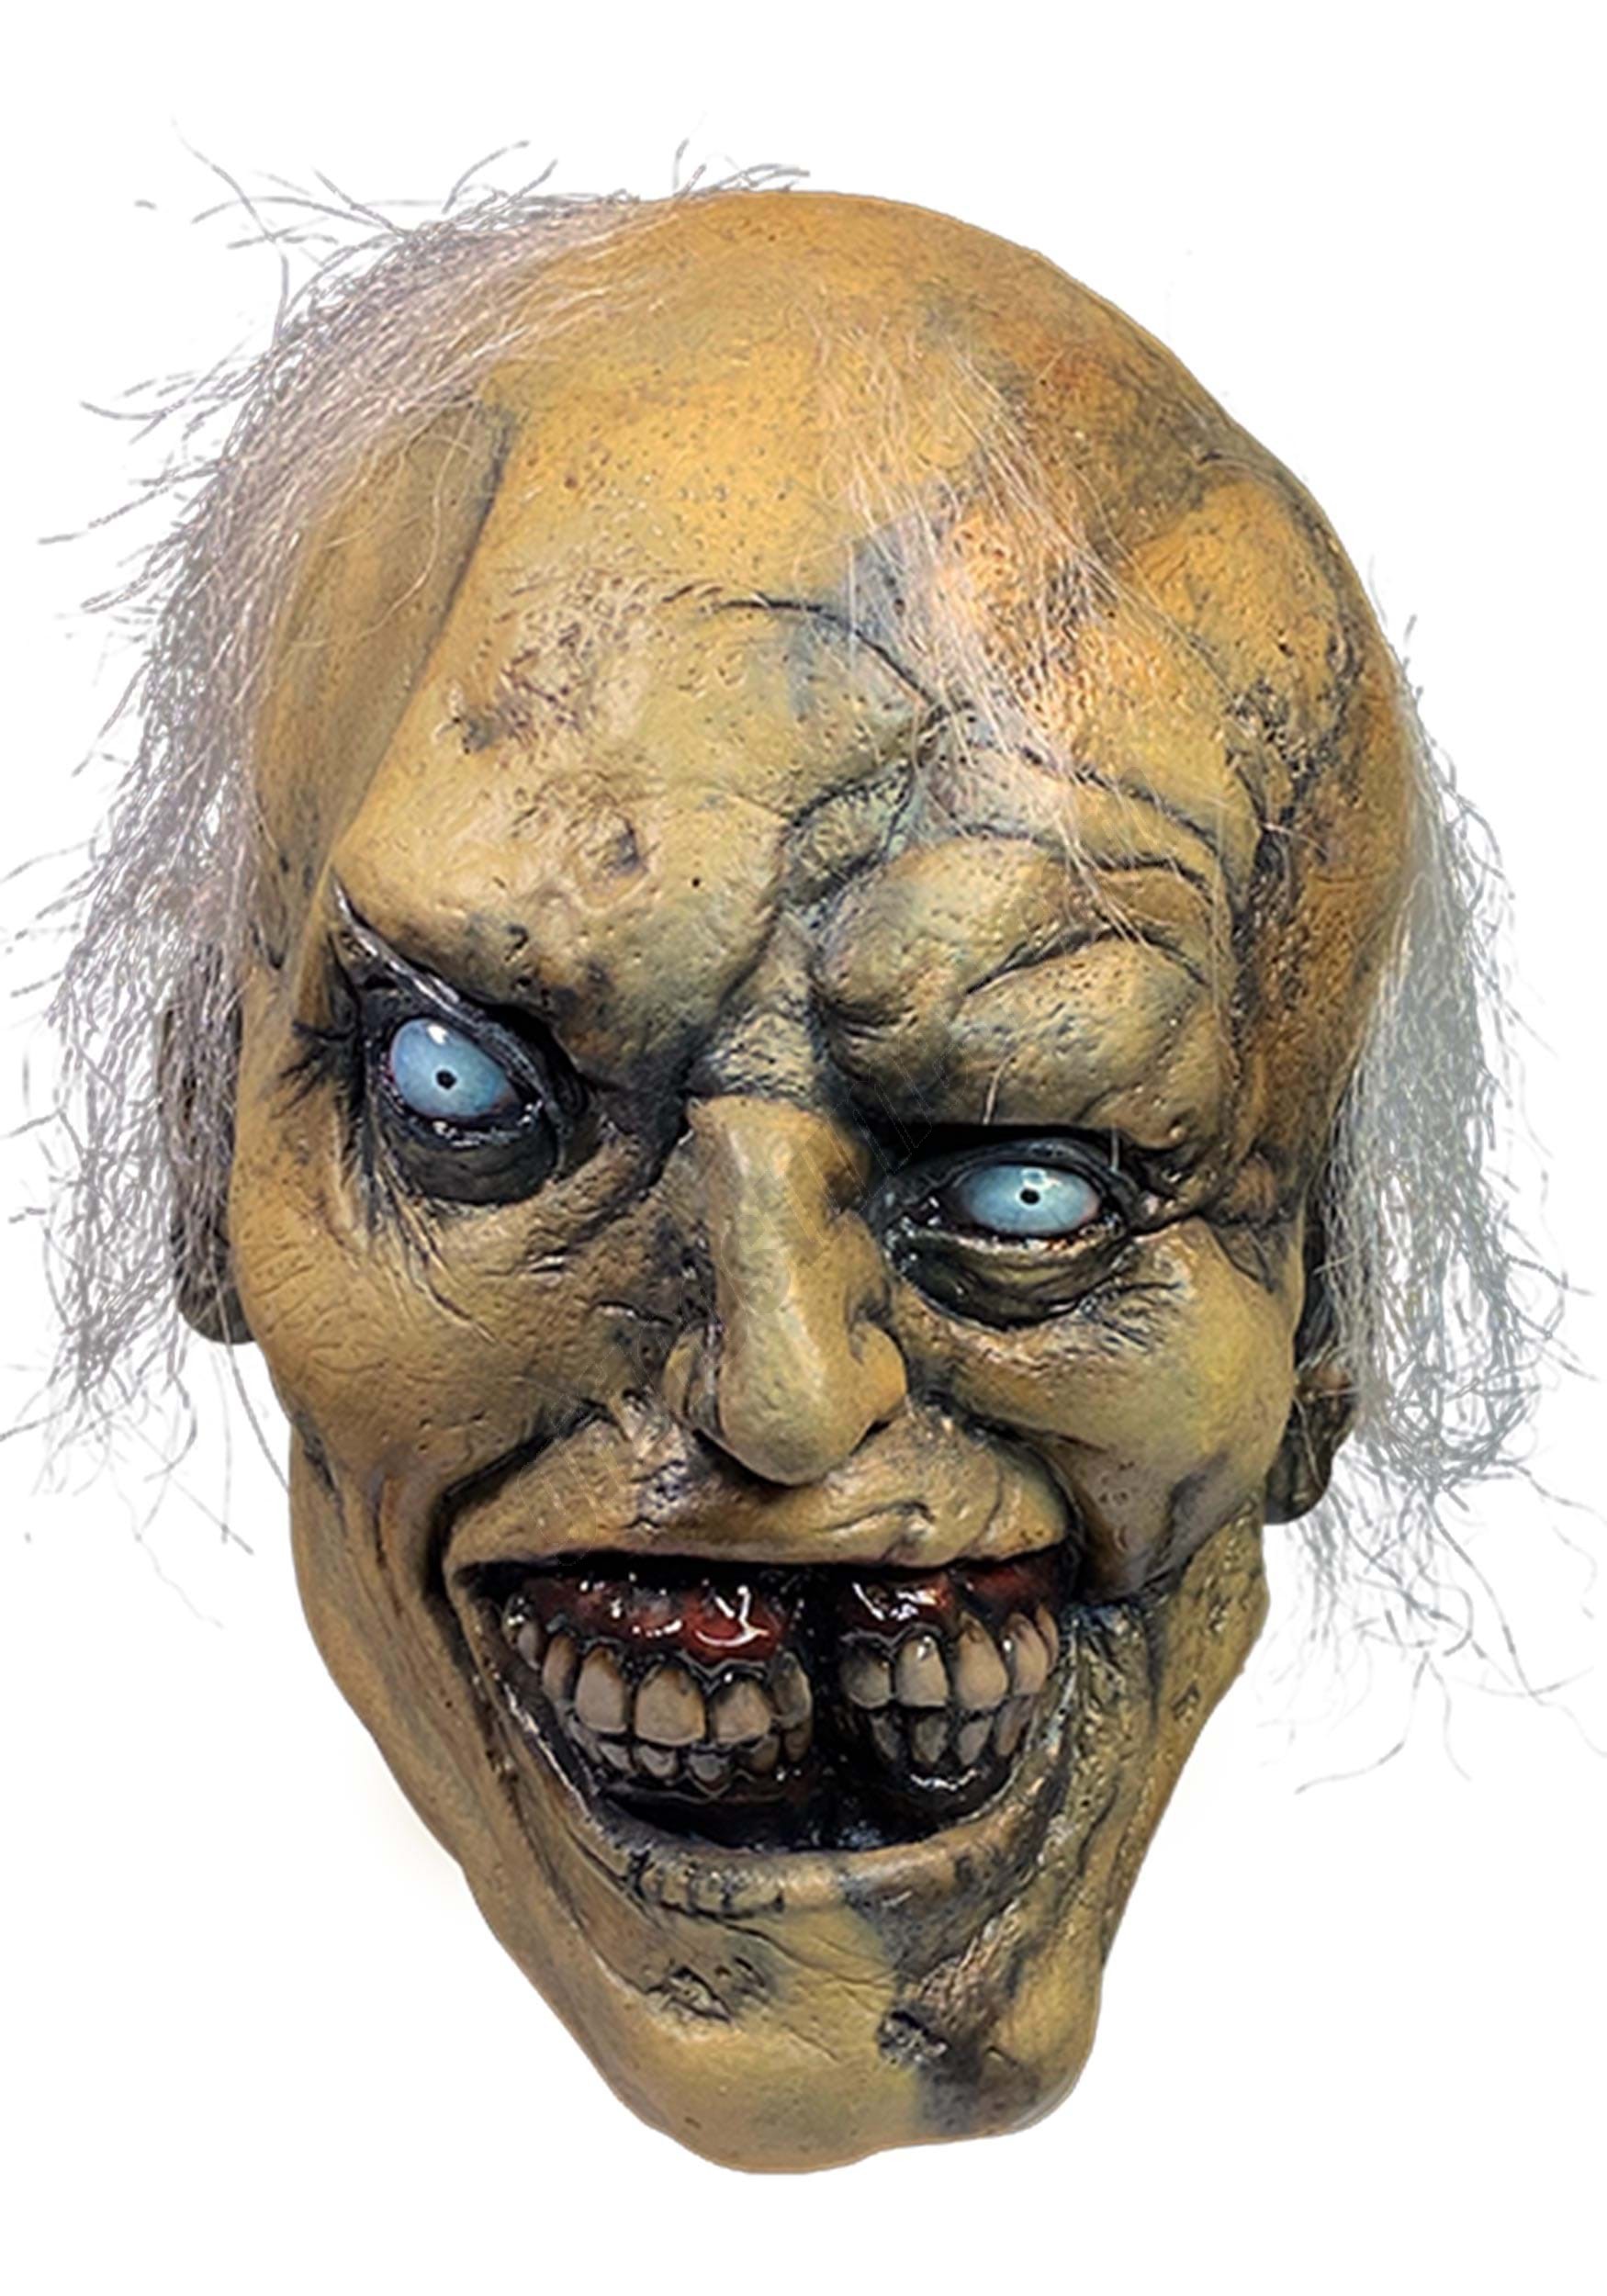 Jangly Man Mask from Scary Stories to Tell in the Dark Jangly Man Mask  Promotions - Jangly Man Mask from Scary Stories to Tell in the Dark Jangly Man Mask  Promotions